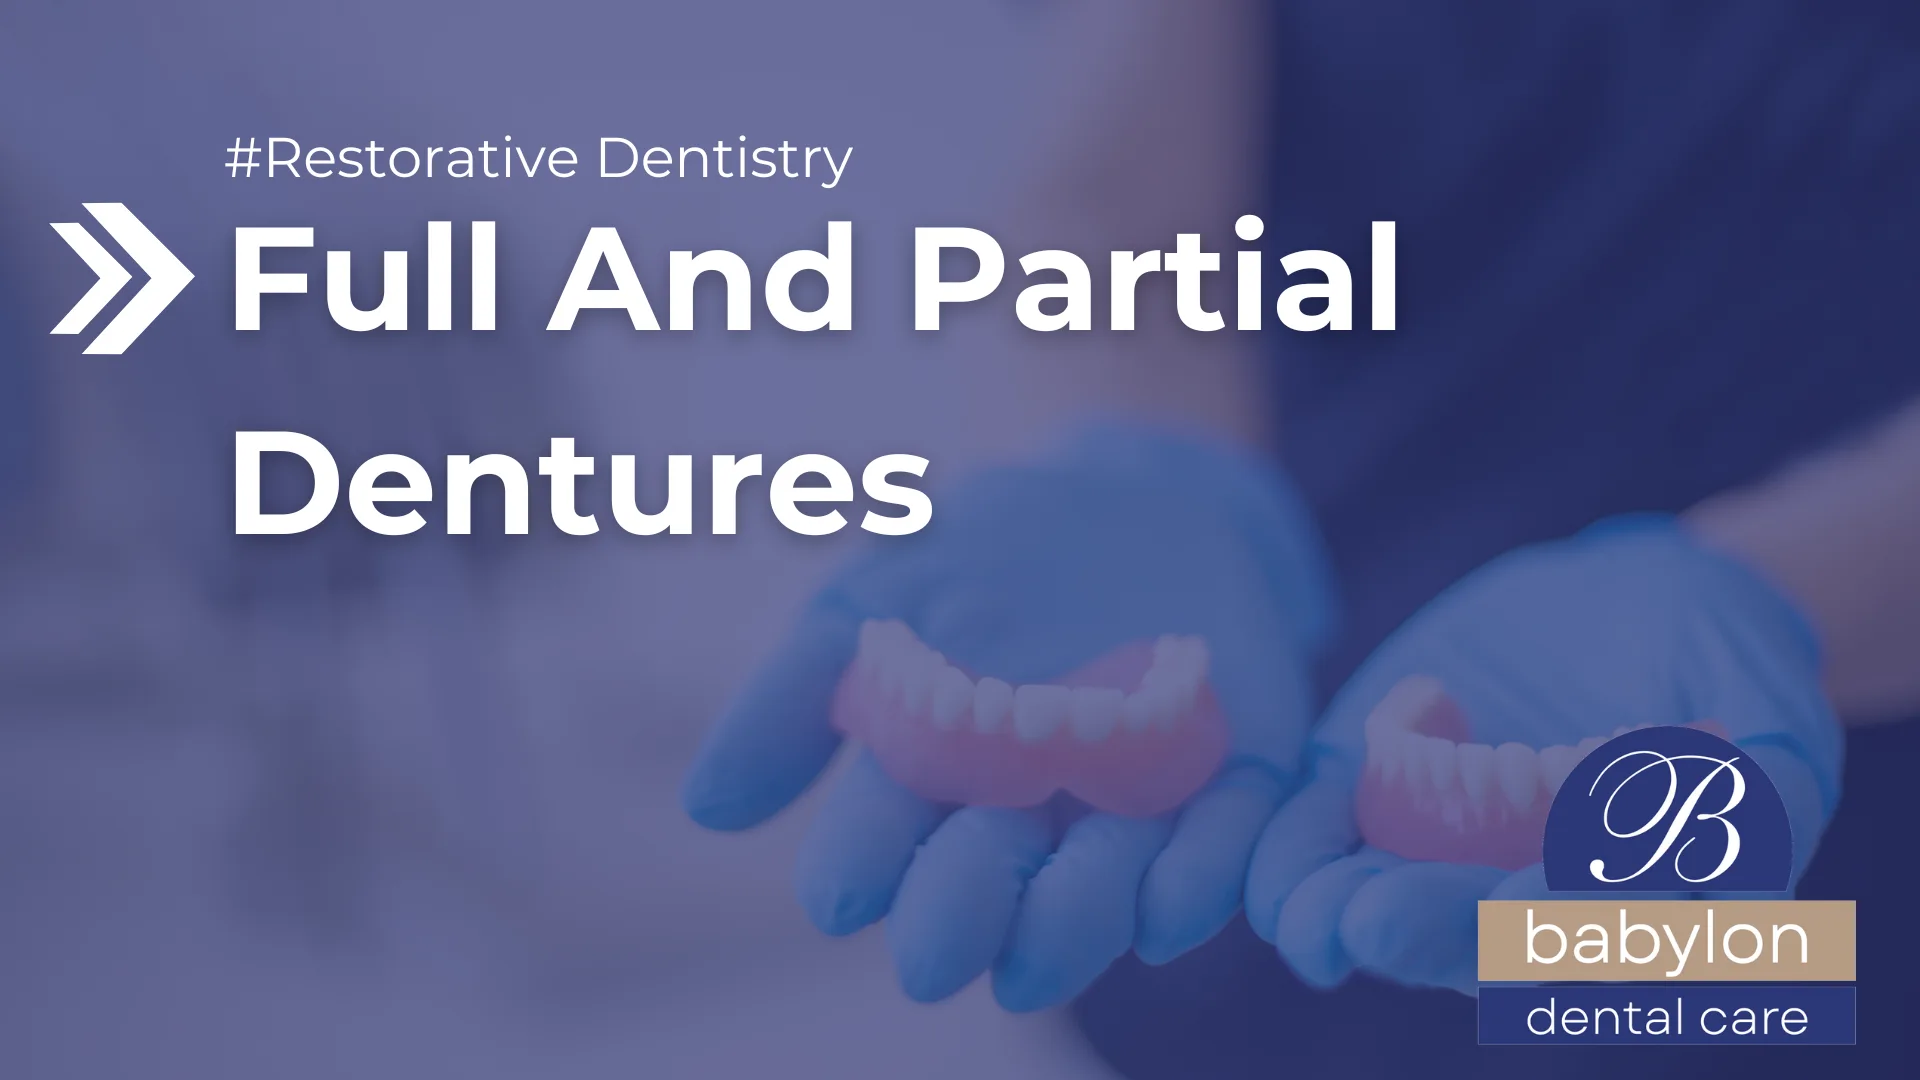 Full And Partial Dentures Image - new logo